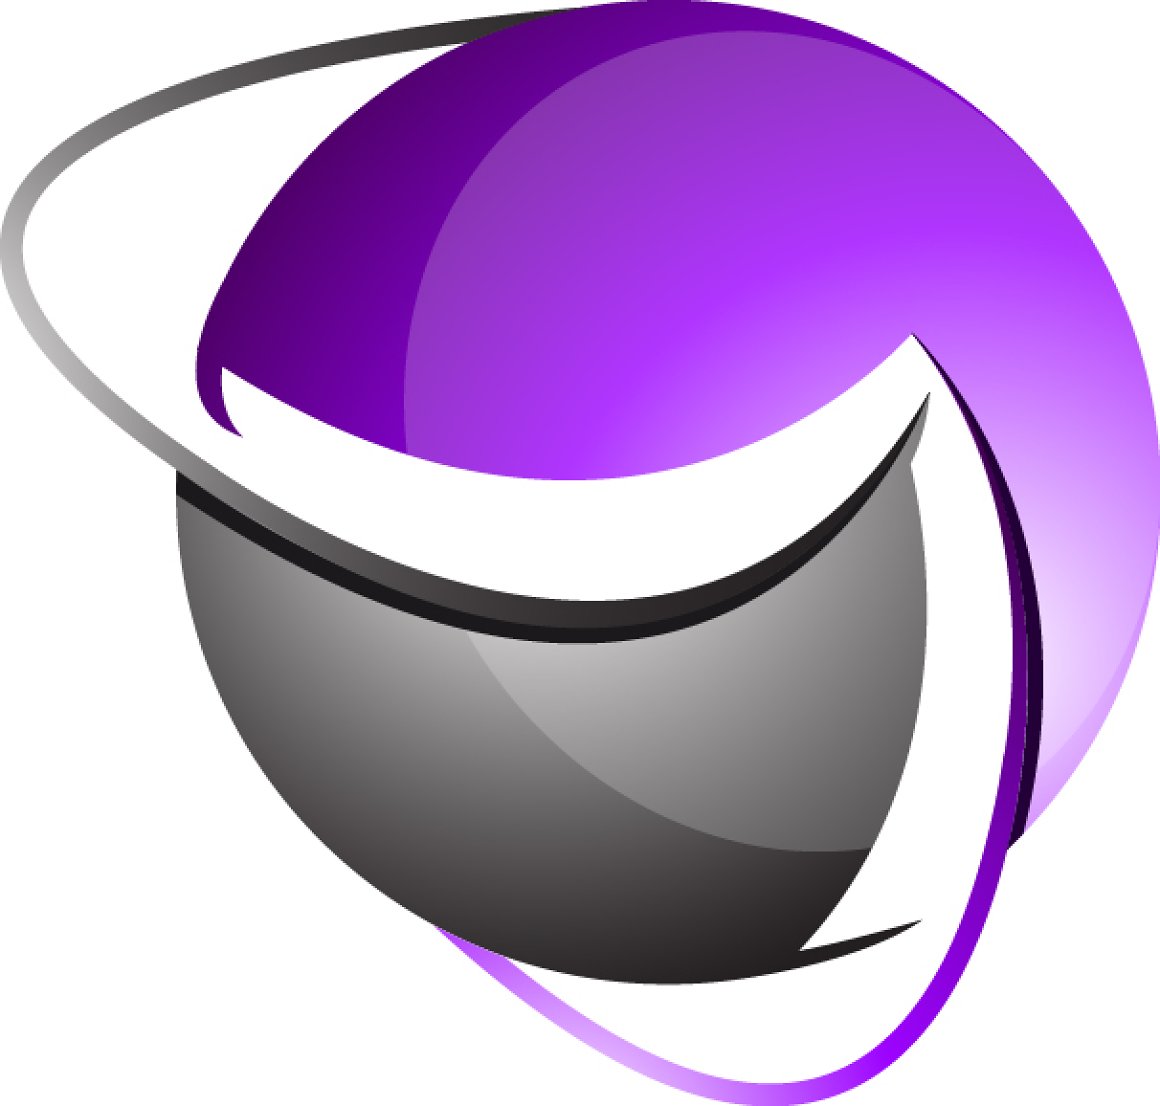 Purple and gray 3D sphere logo on a white background.